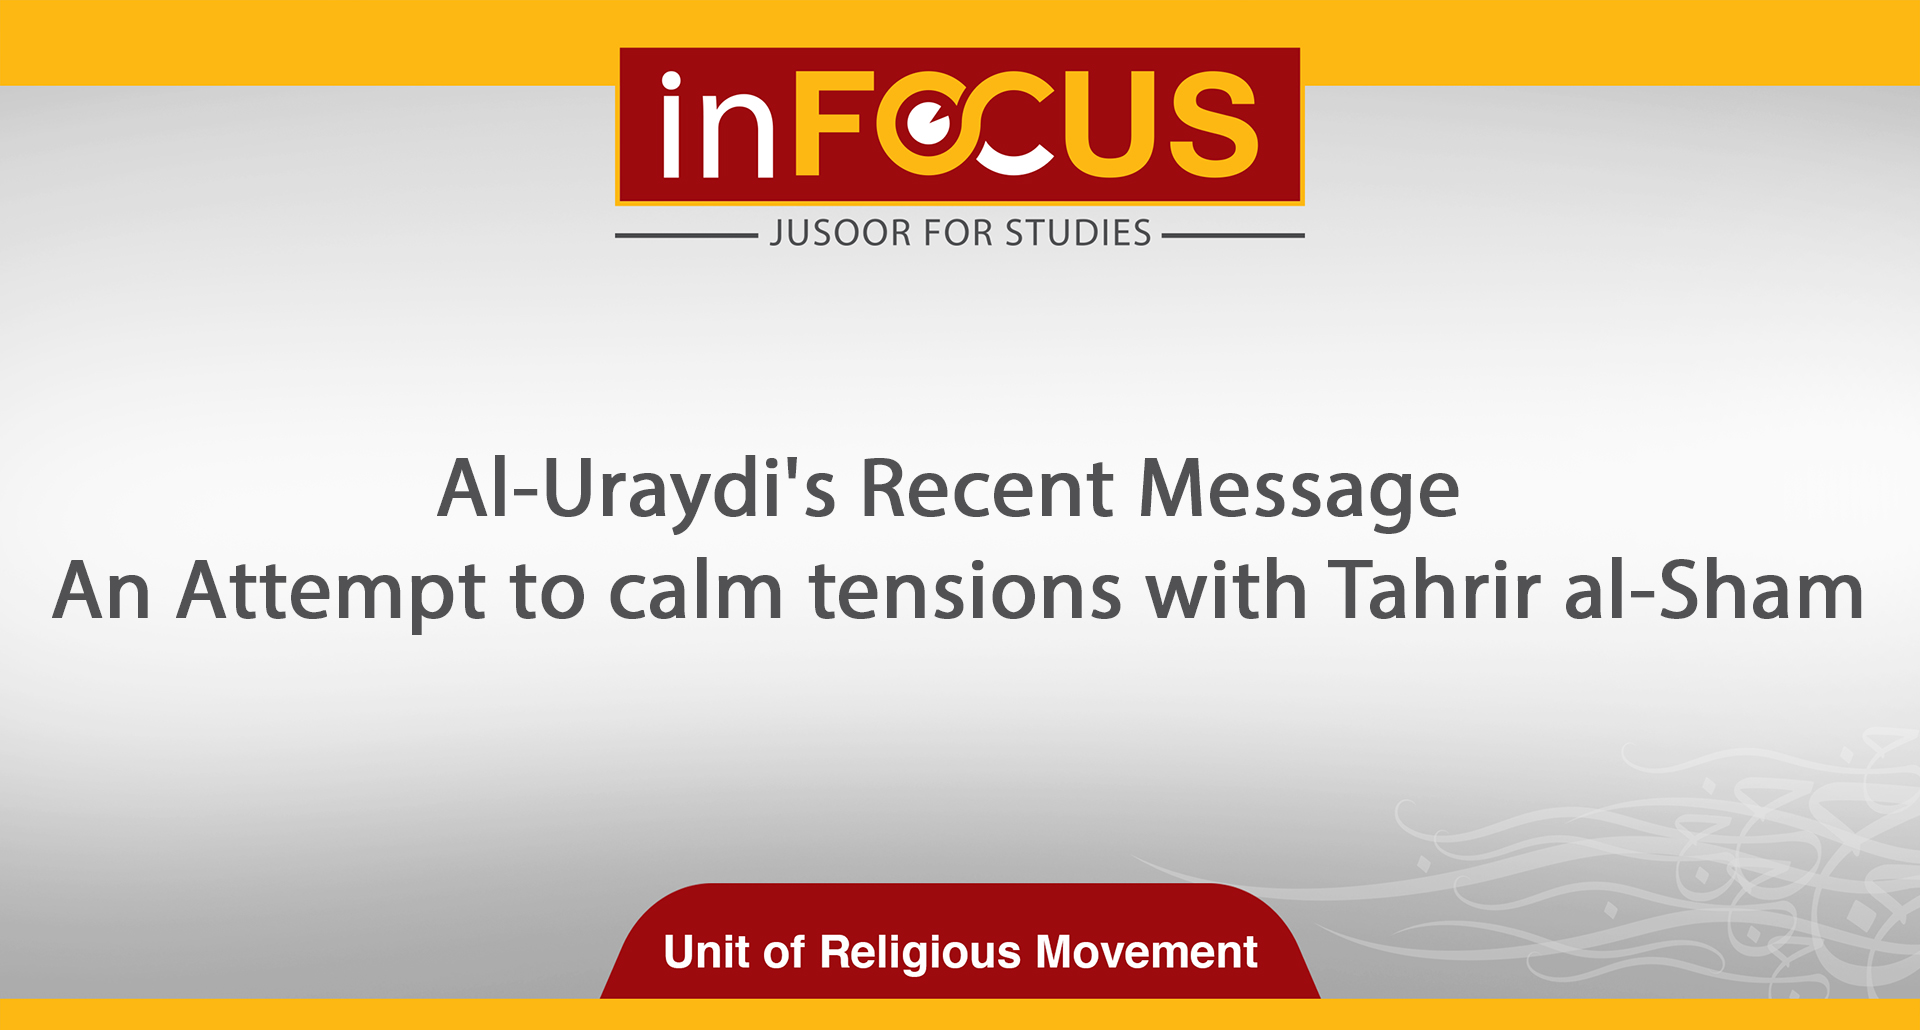 Al-Uraydi's Recent Message: An Attempt to calm tensions with Tahrir al-Sham